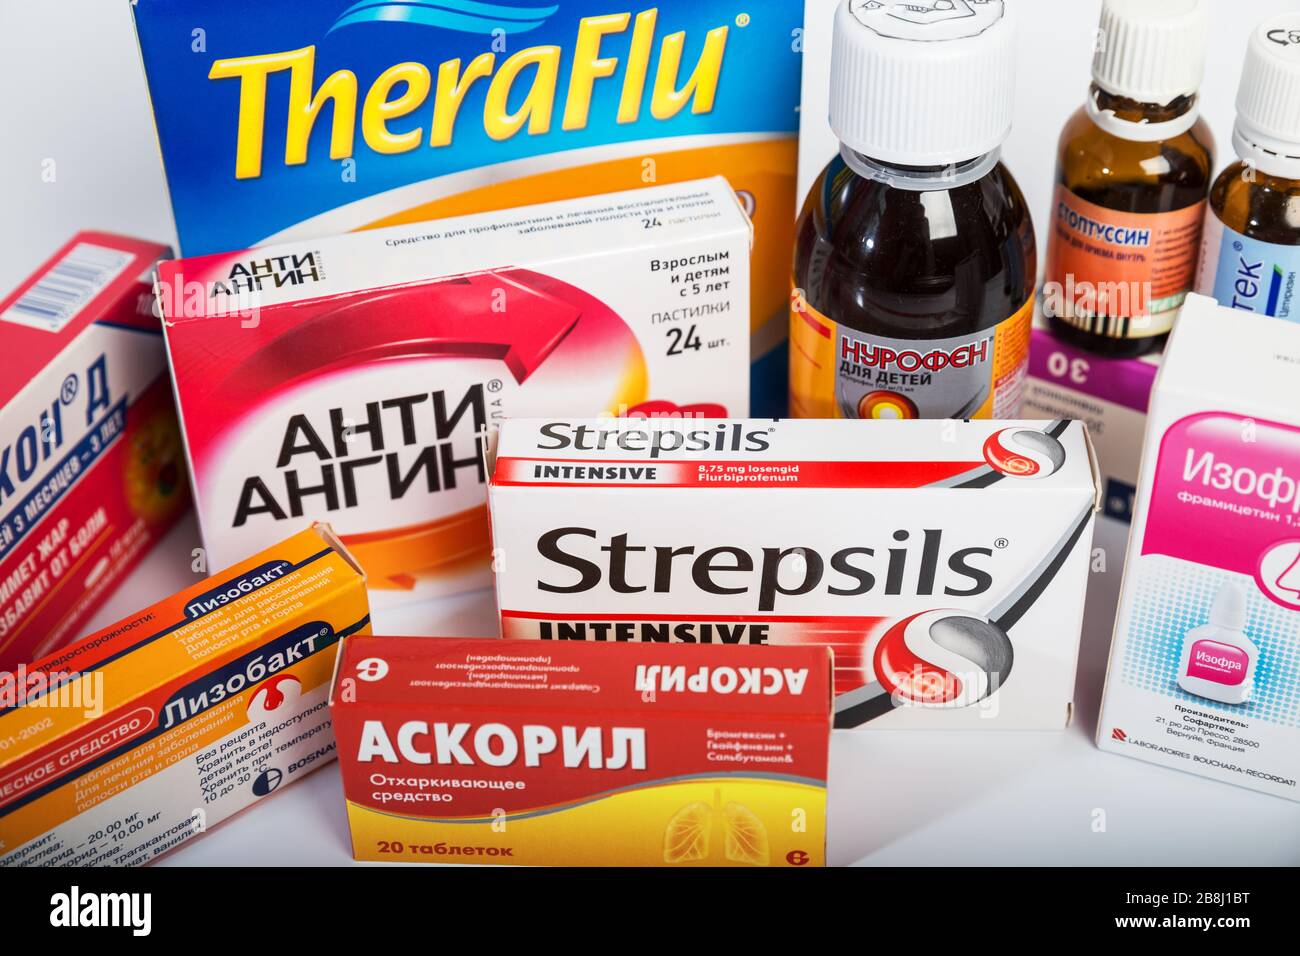 RUSSIA - MARCH, 2020: Home medicine kit. A set of over-the-counter medicines for treating colds in children and adults. Illustrative editorial Stock Photo